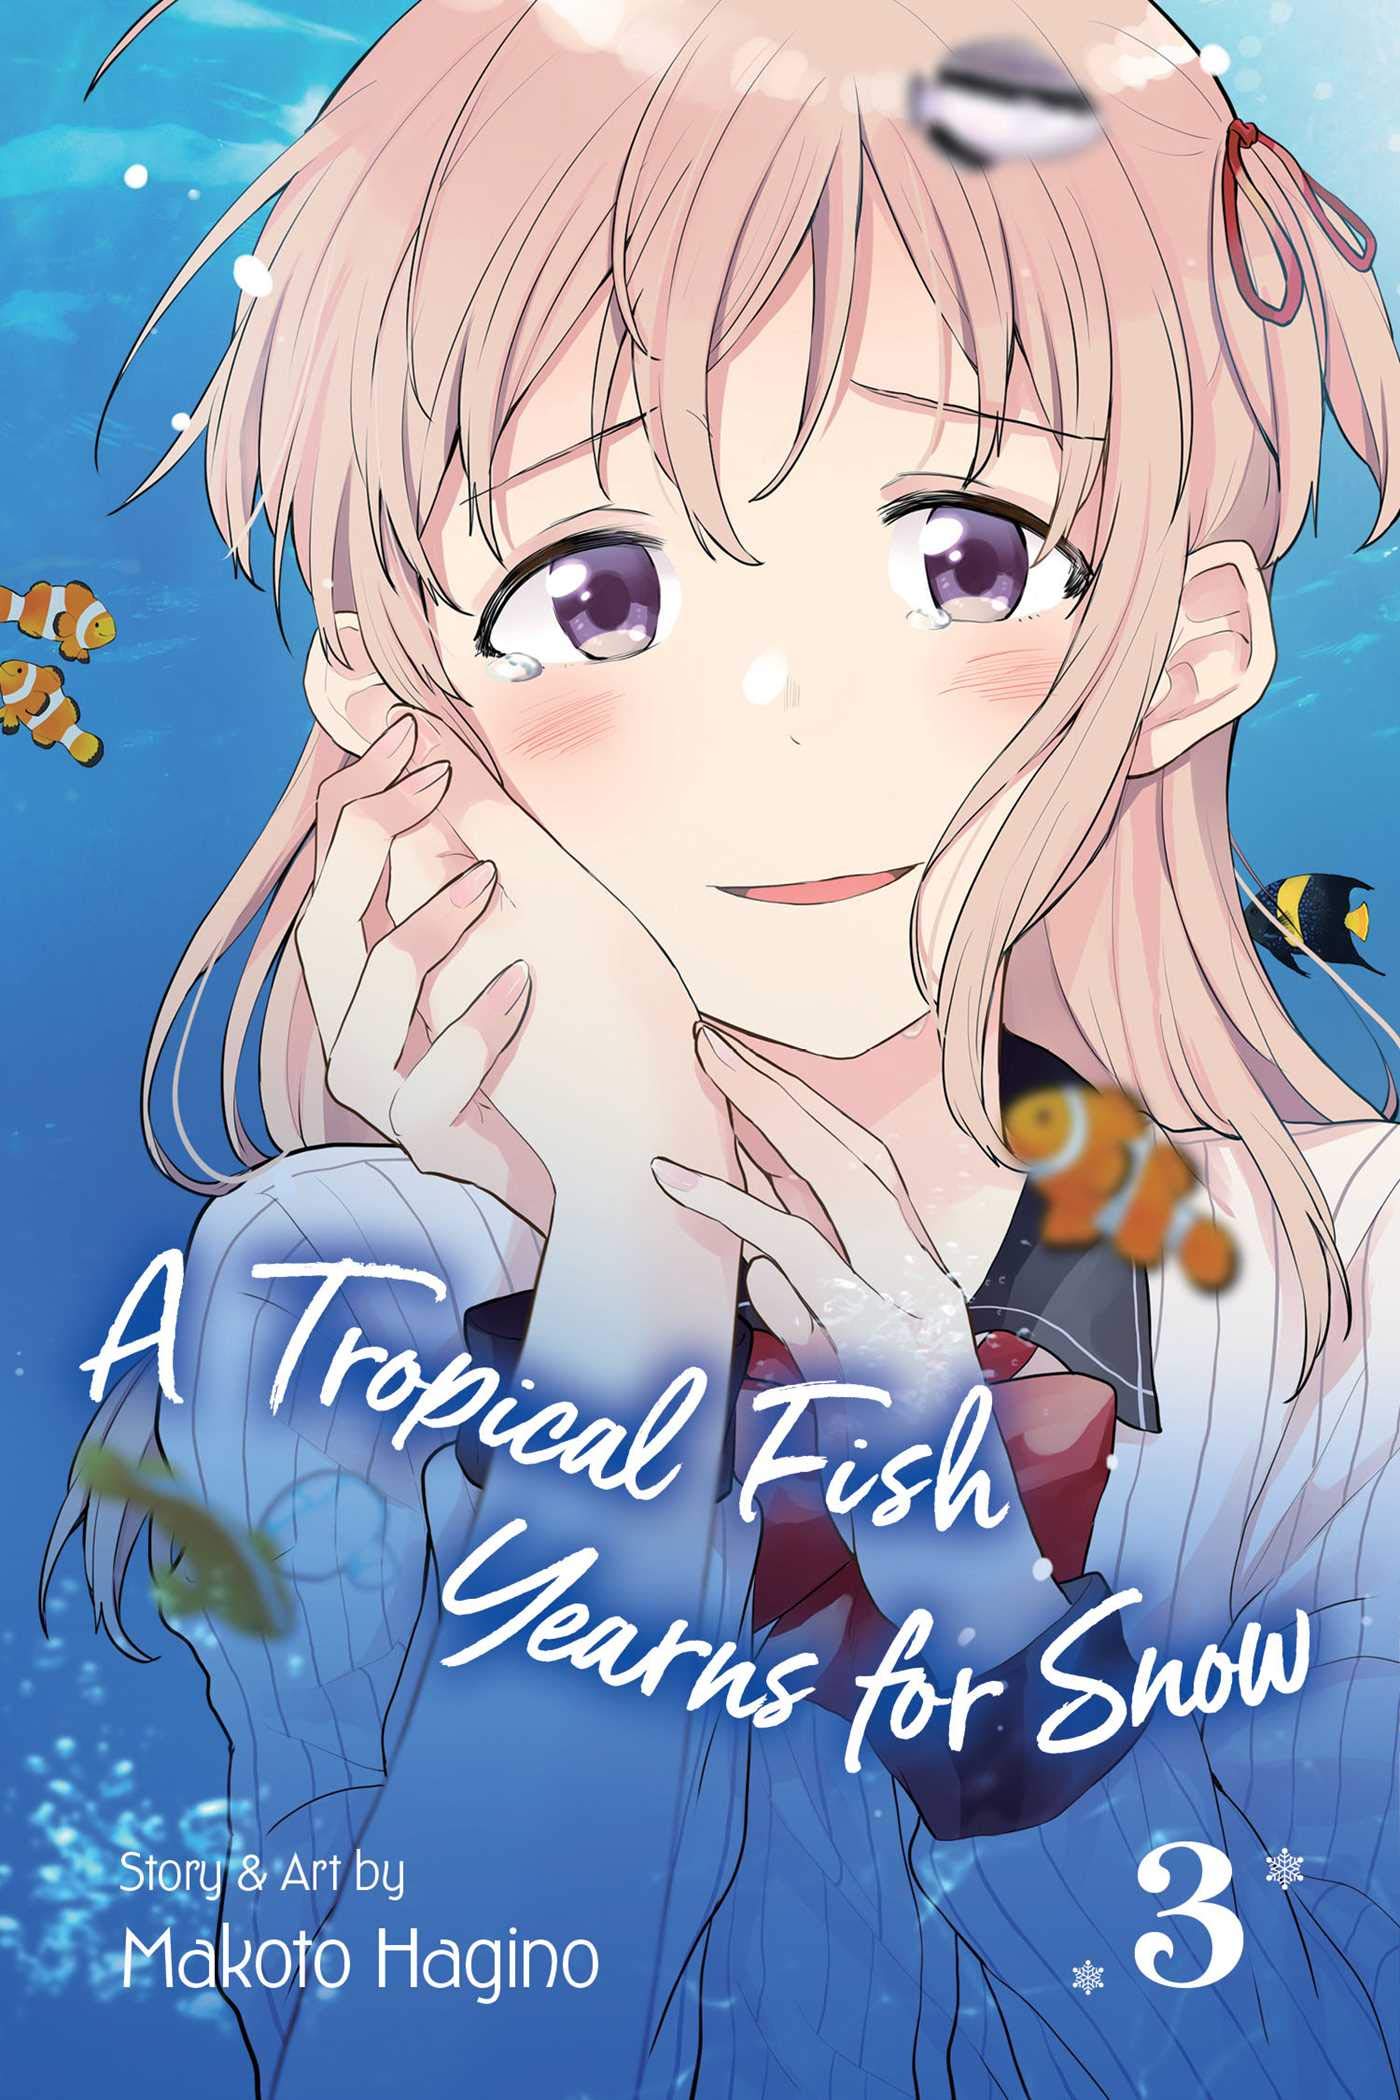 A Tropical Fish Yearns for Snow - Vol. 3